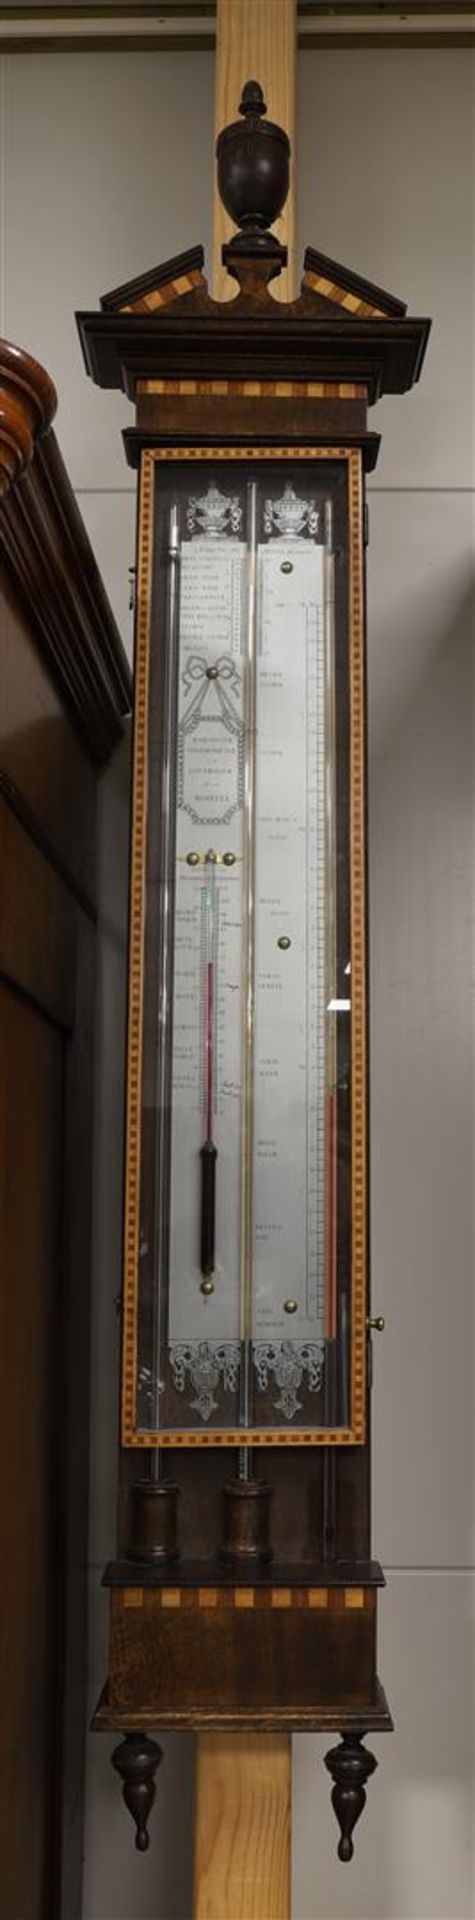 A baking barometer in mahogany case, Louis XVI style, 20th century, after an antique example, marked